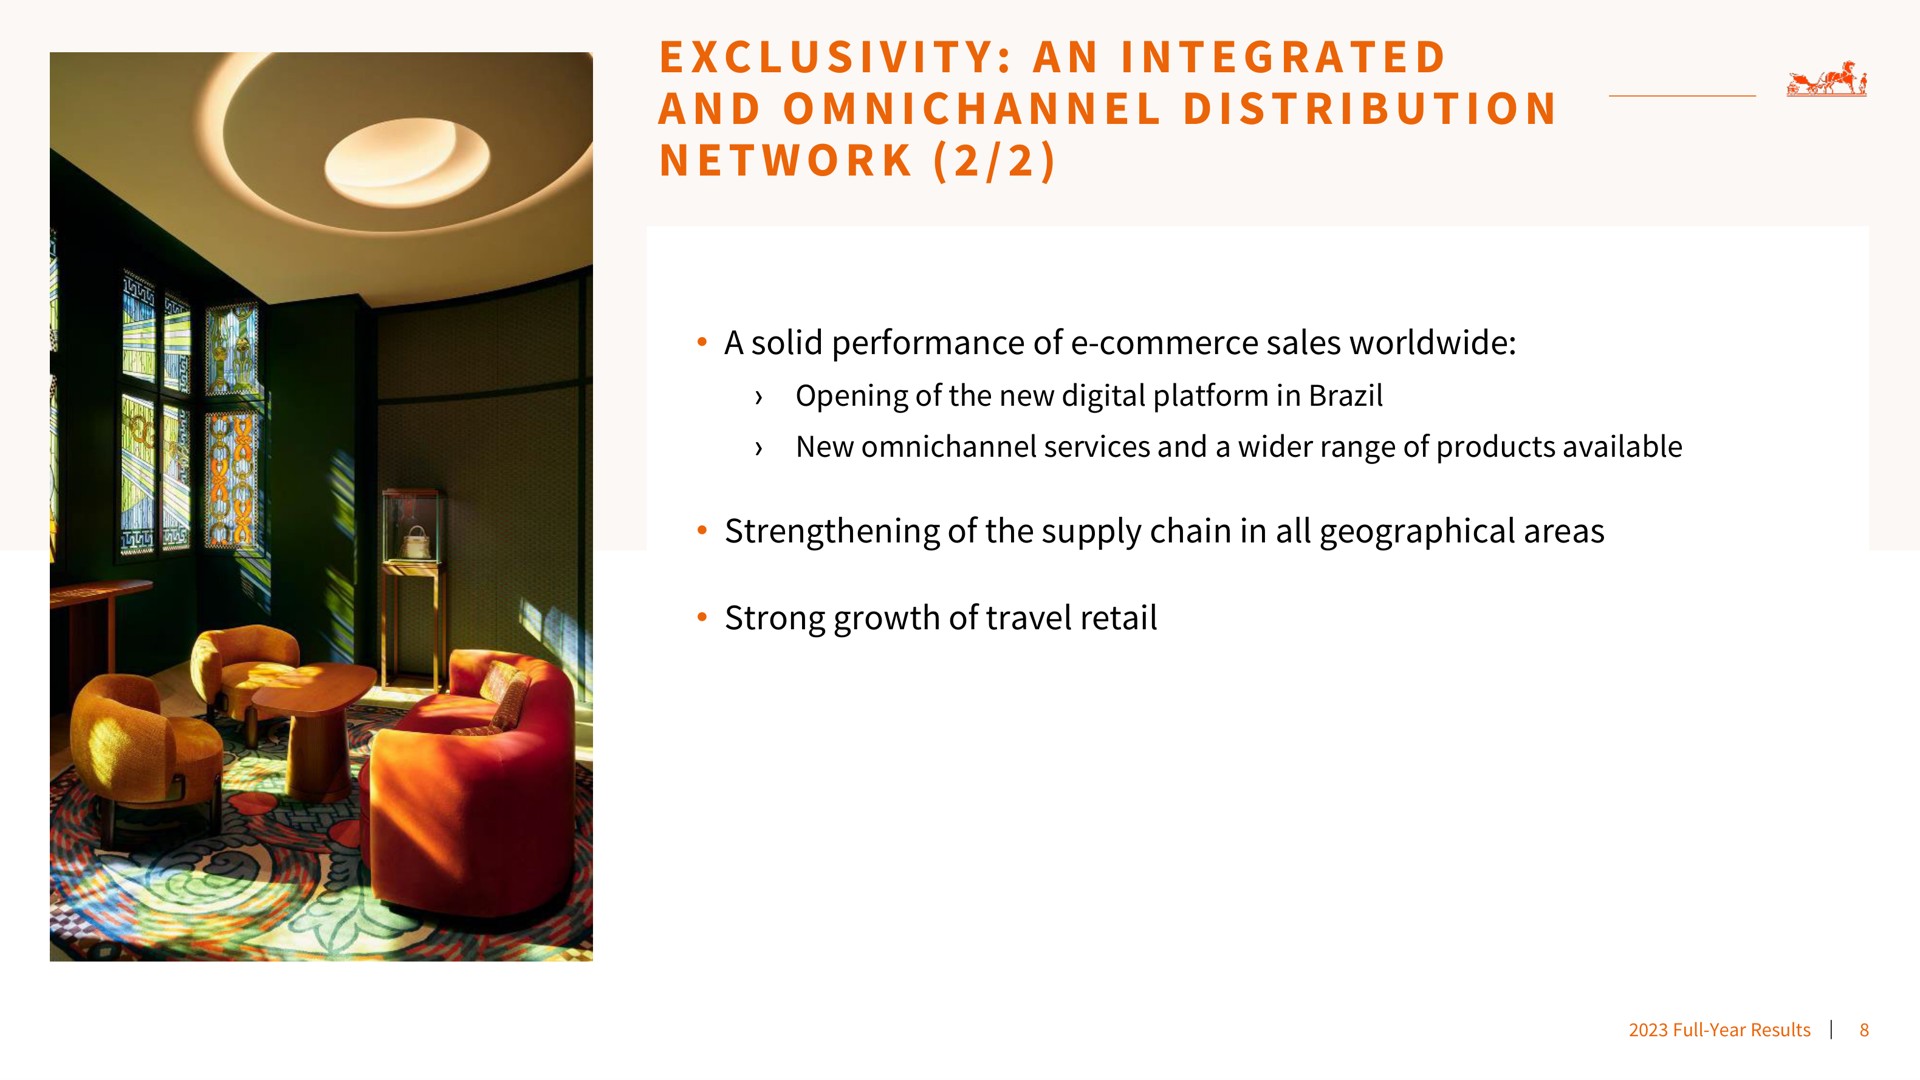 i i a i a a i a i i i exclusivity an integrated and distribution network | Hermes